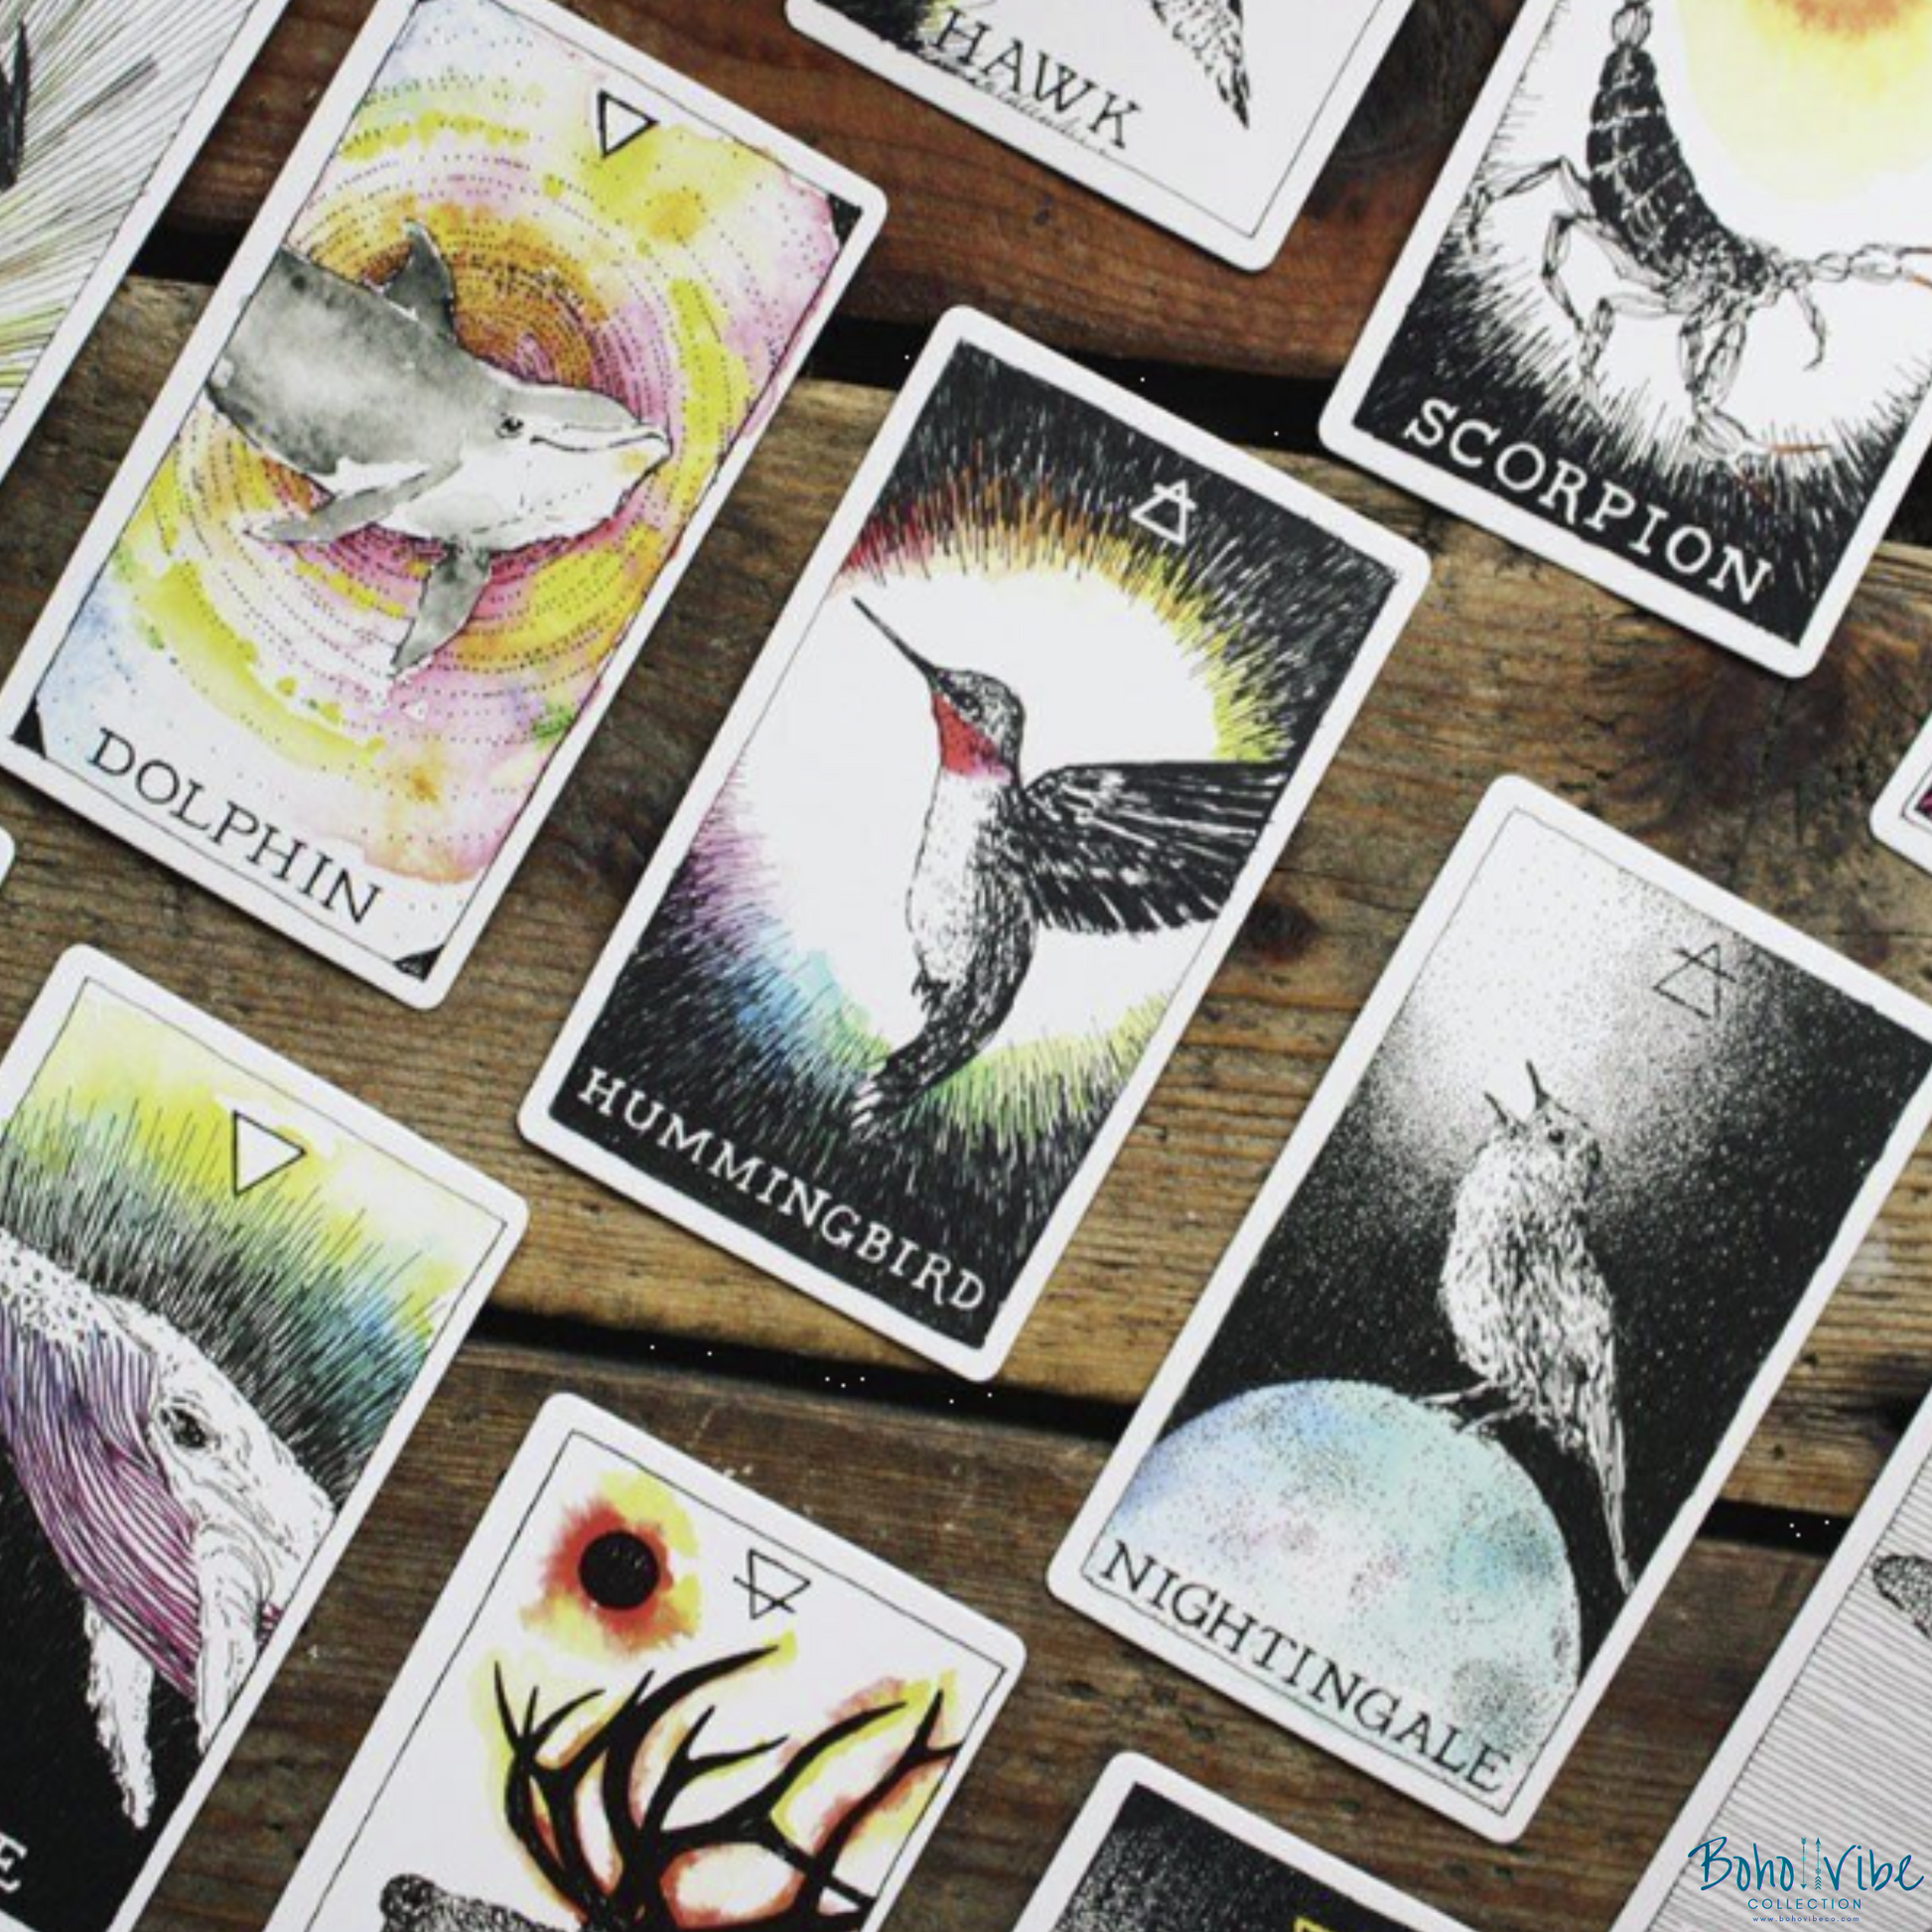 Boho ↡↟ Vibe Collection ↠ The Wild Unknown Animal Spirit Deck and Guidebook